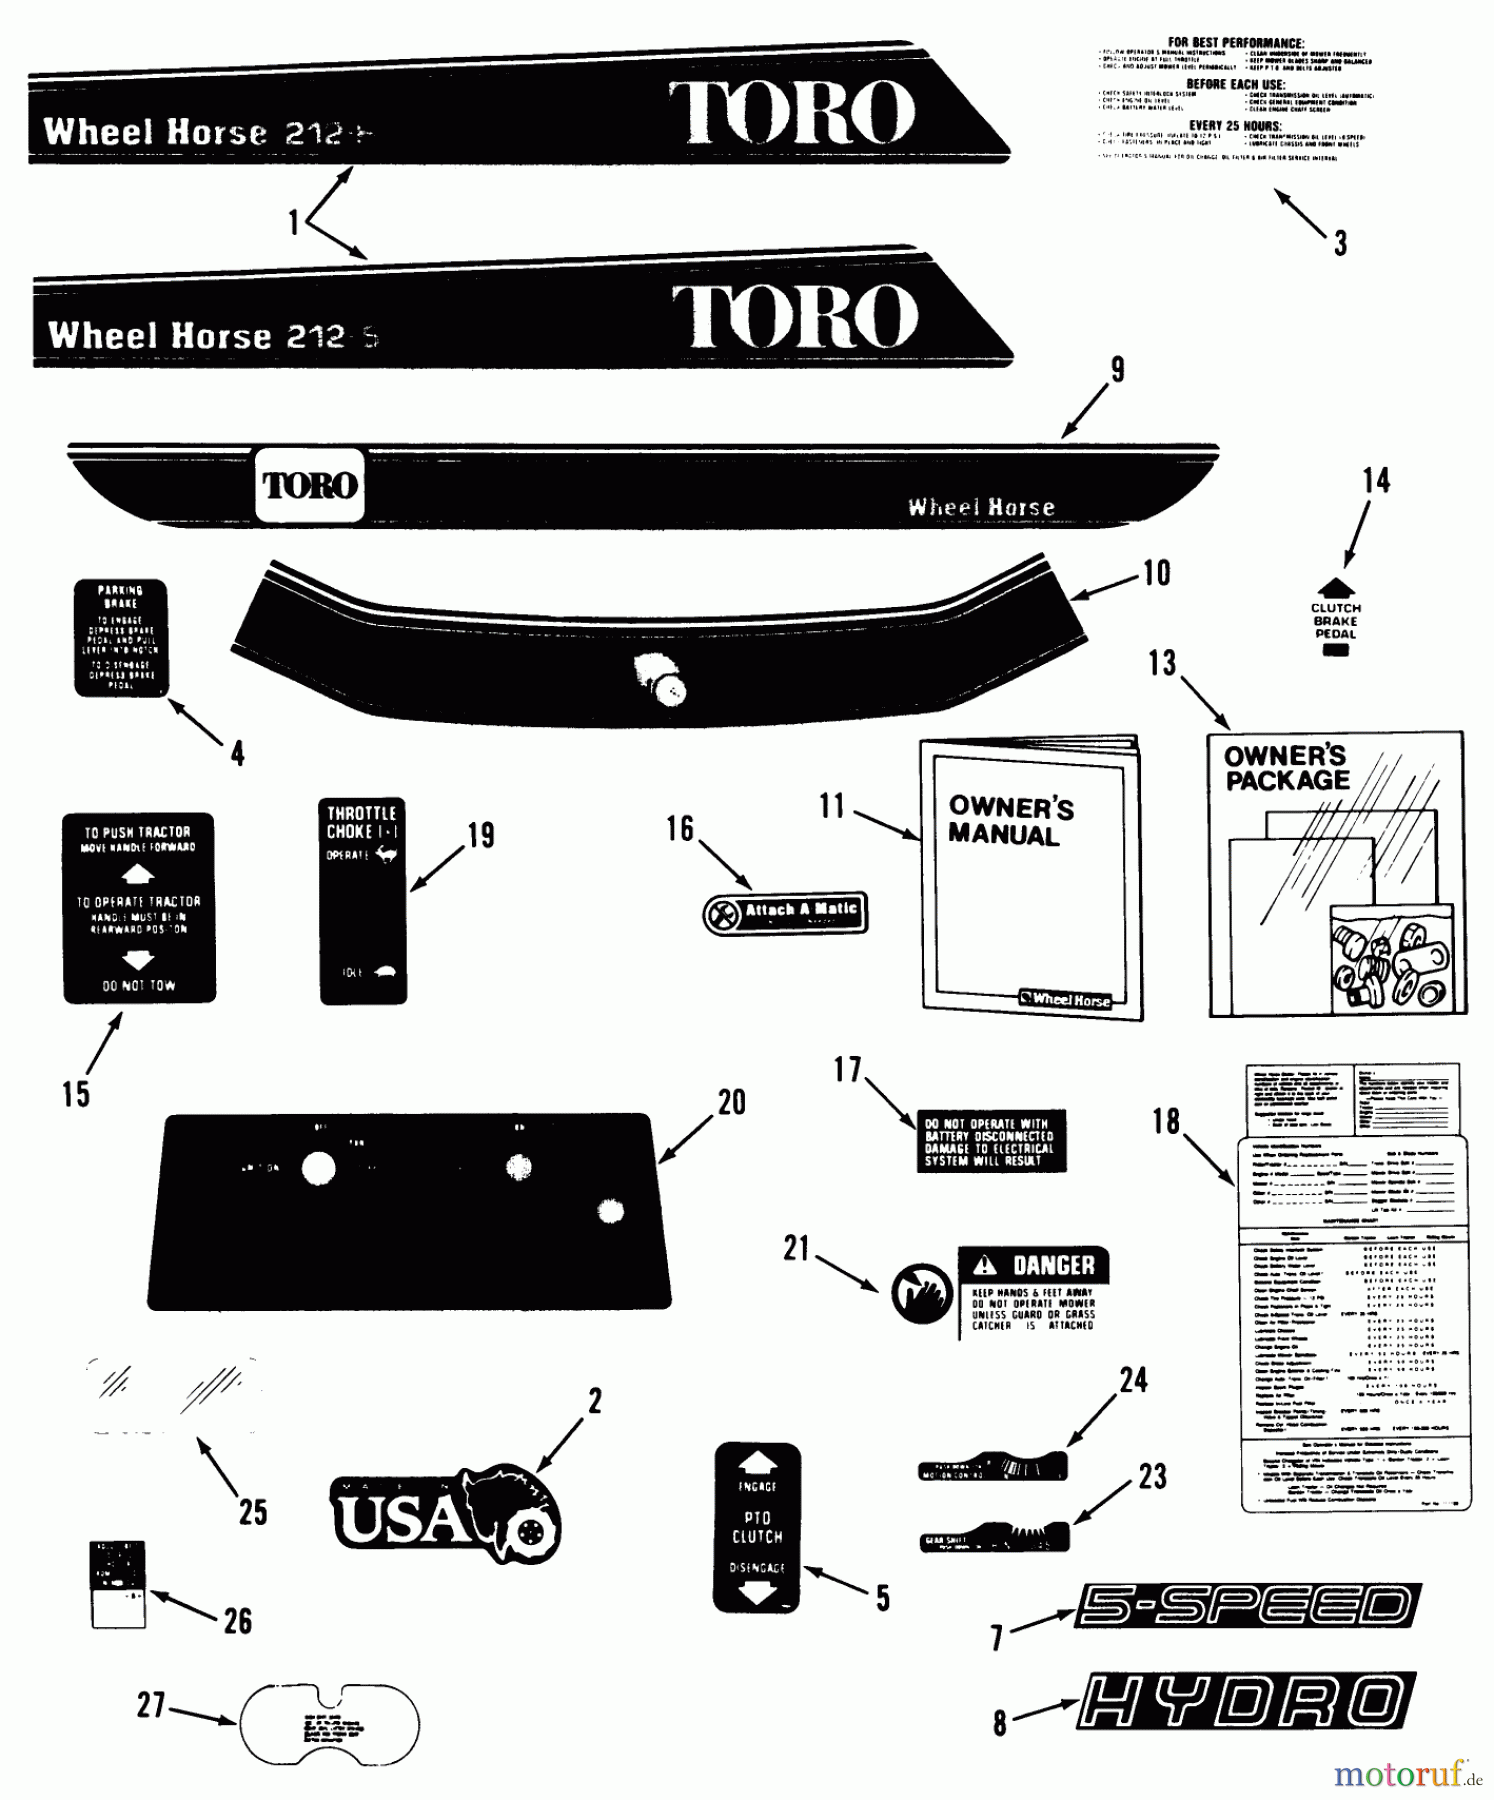  Toro Neu Mowers, Lawn & Garden Tractor Seite 2 A2-12KE02 (212-H) - Toro 212-H Tractor, 1991 (1000001-1999999) DECAL & MISCELLANEOUS PARTS ASSEMBLY